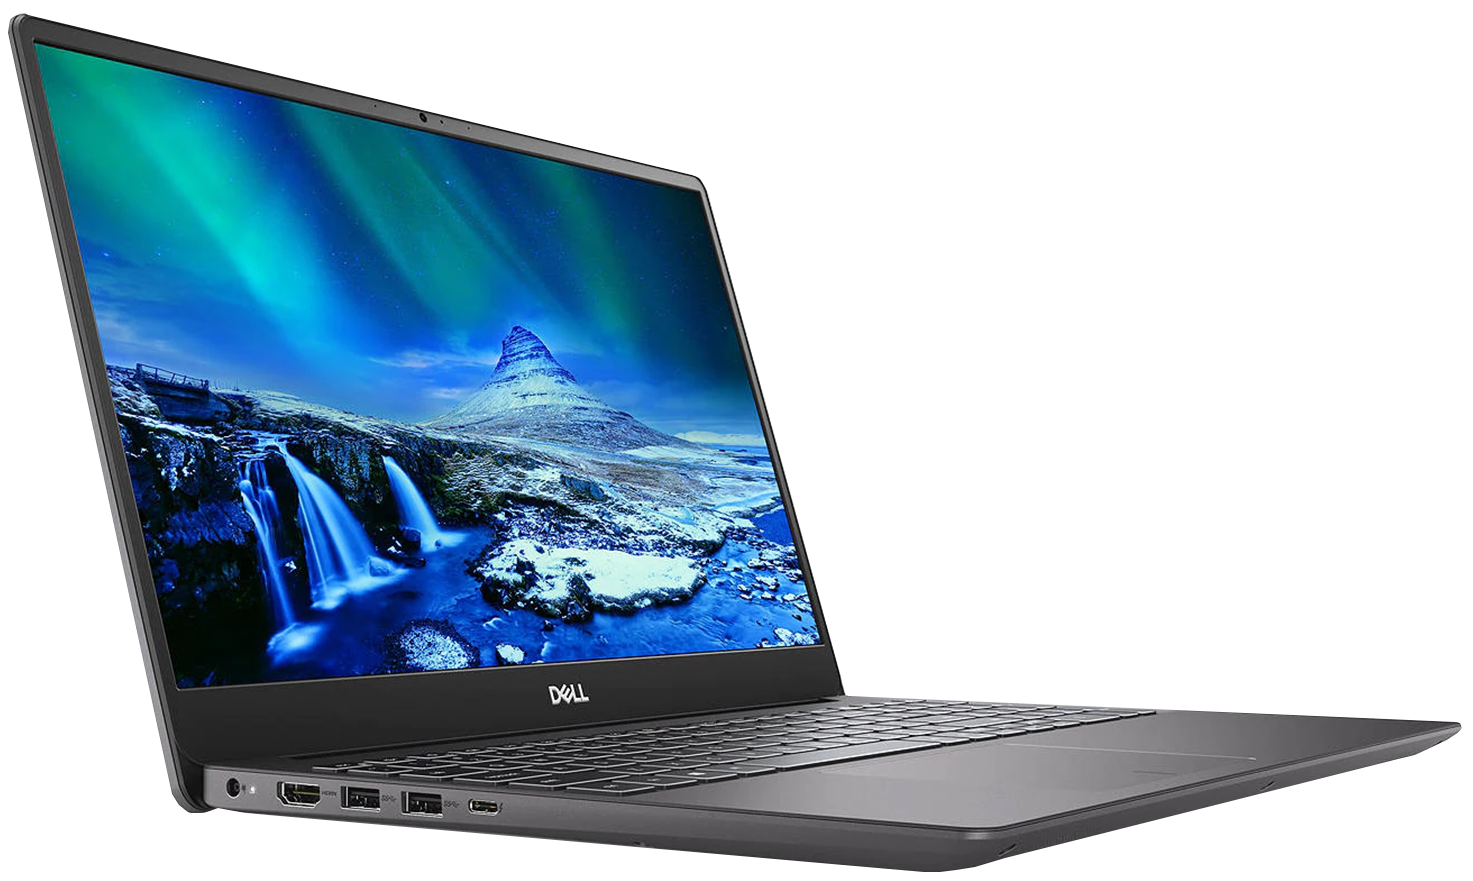 Dell Inspiron 15 7590 review - a premium Inspiron that actually